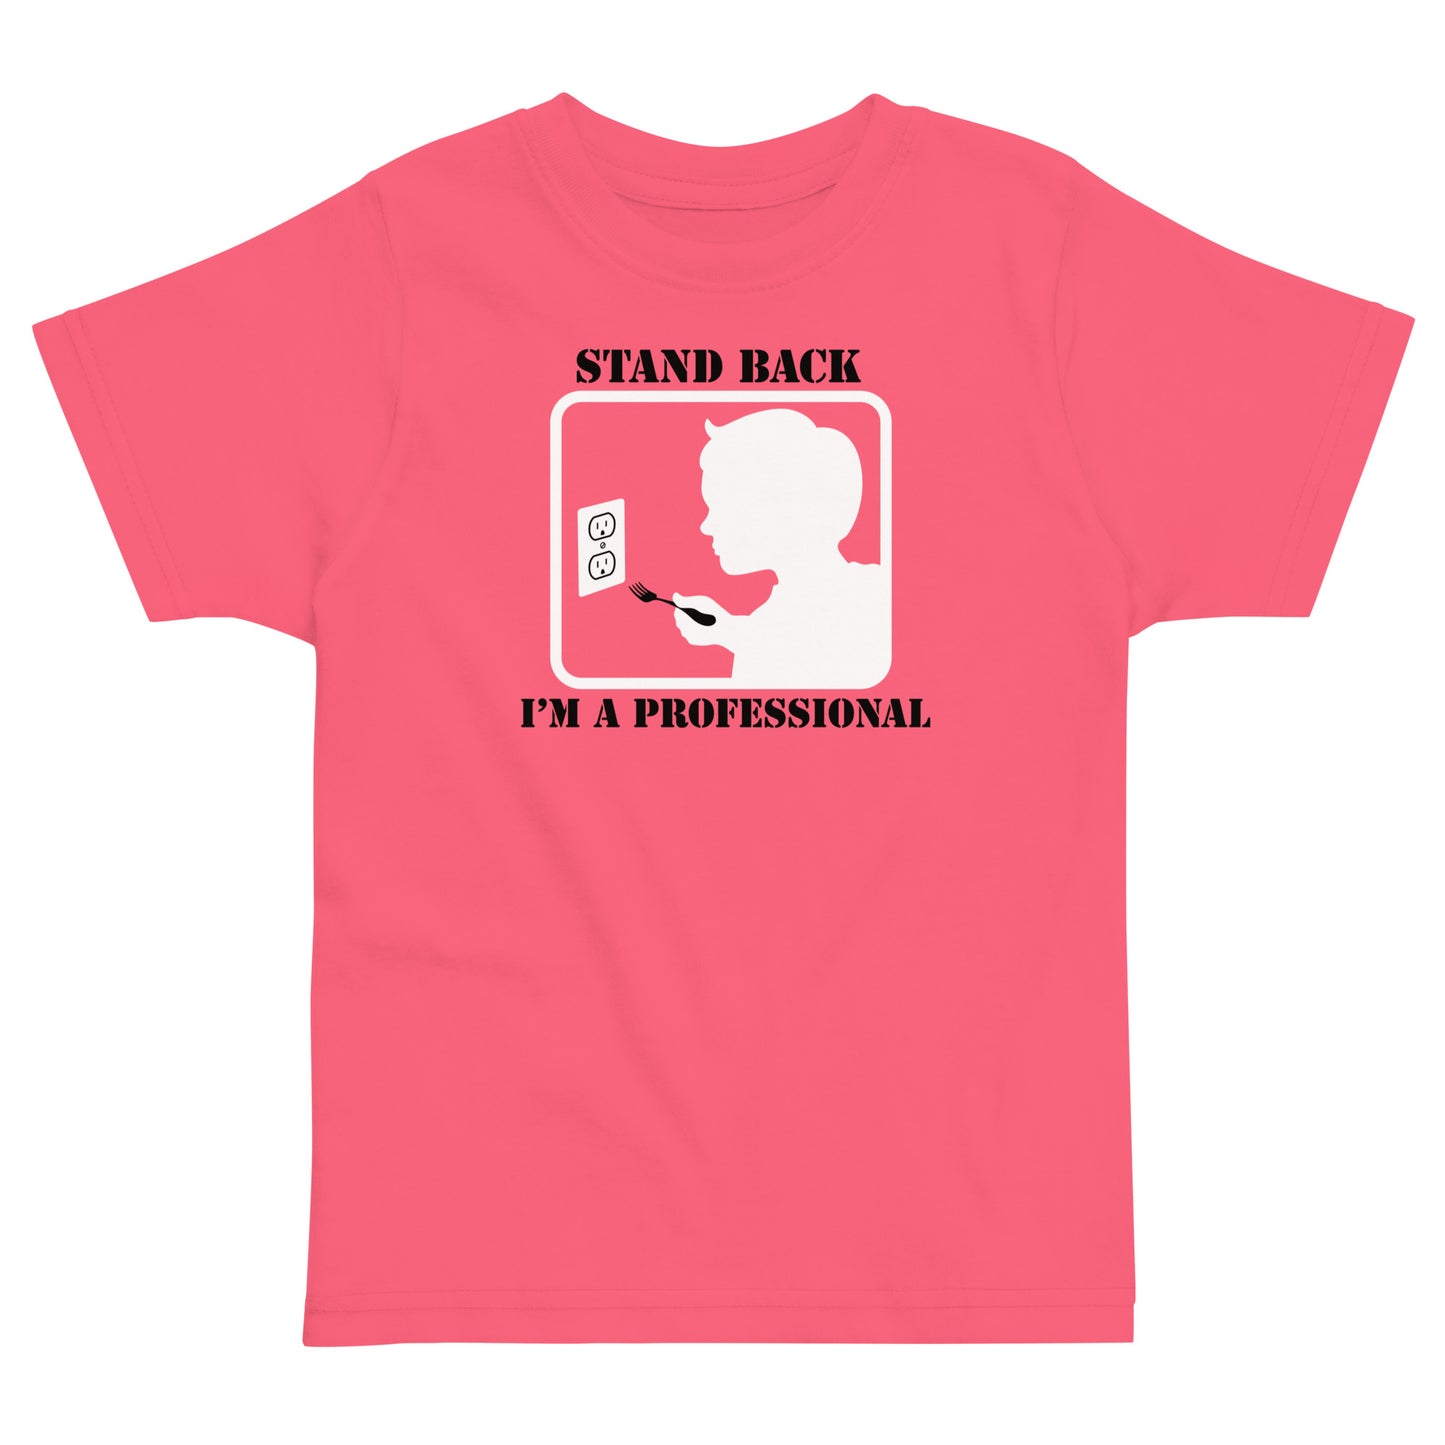 Stand Back, I'm A Professional Kid's Toddler Tee